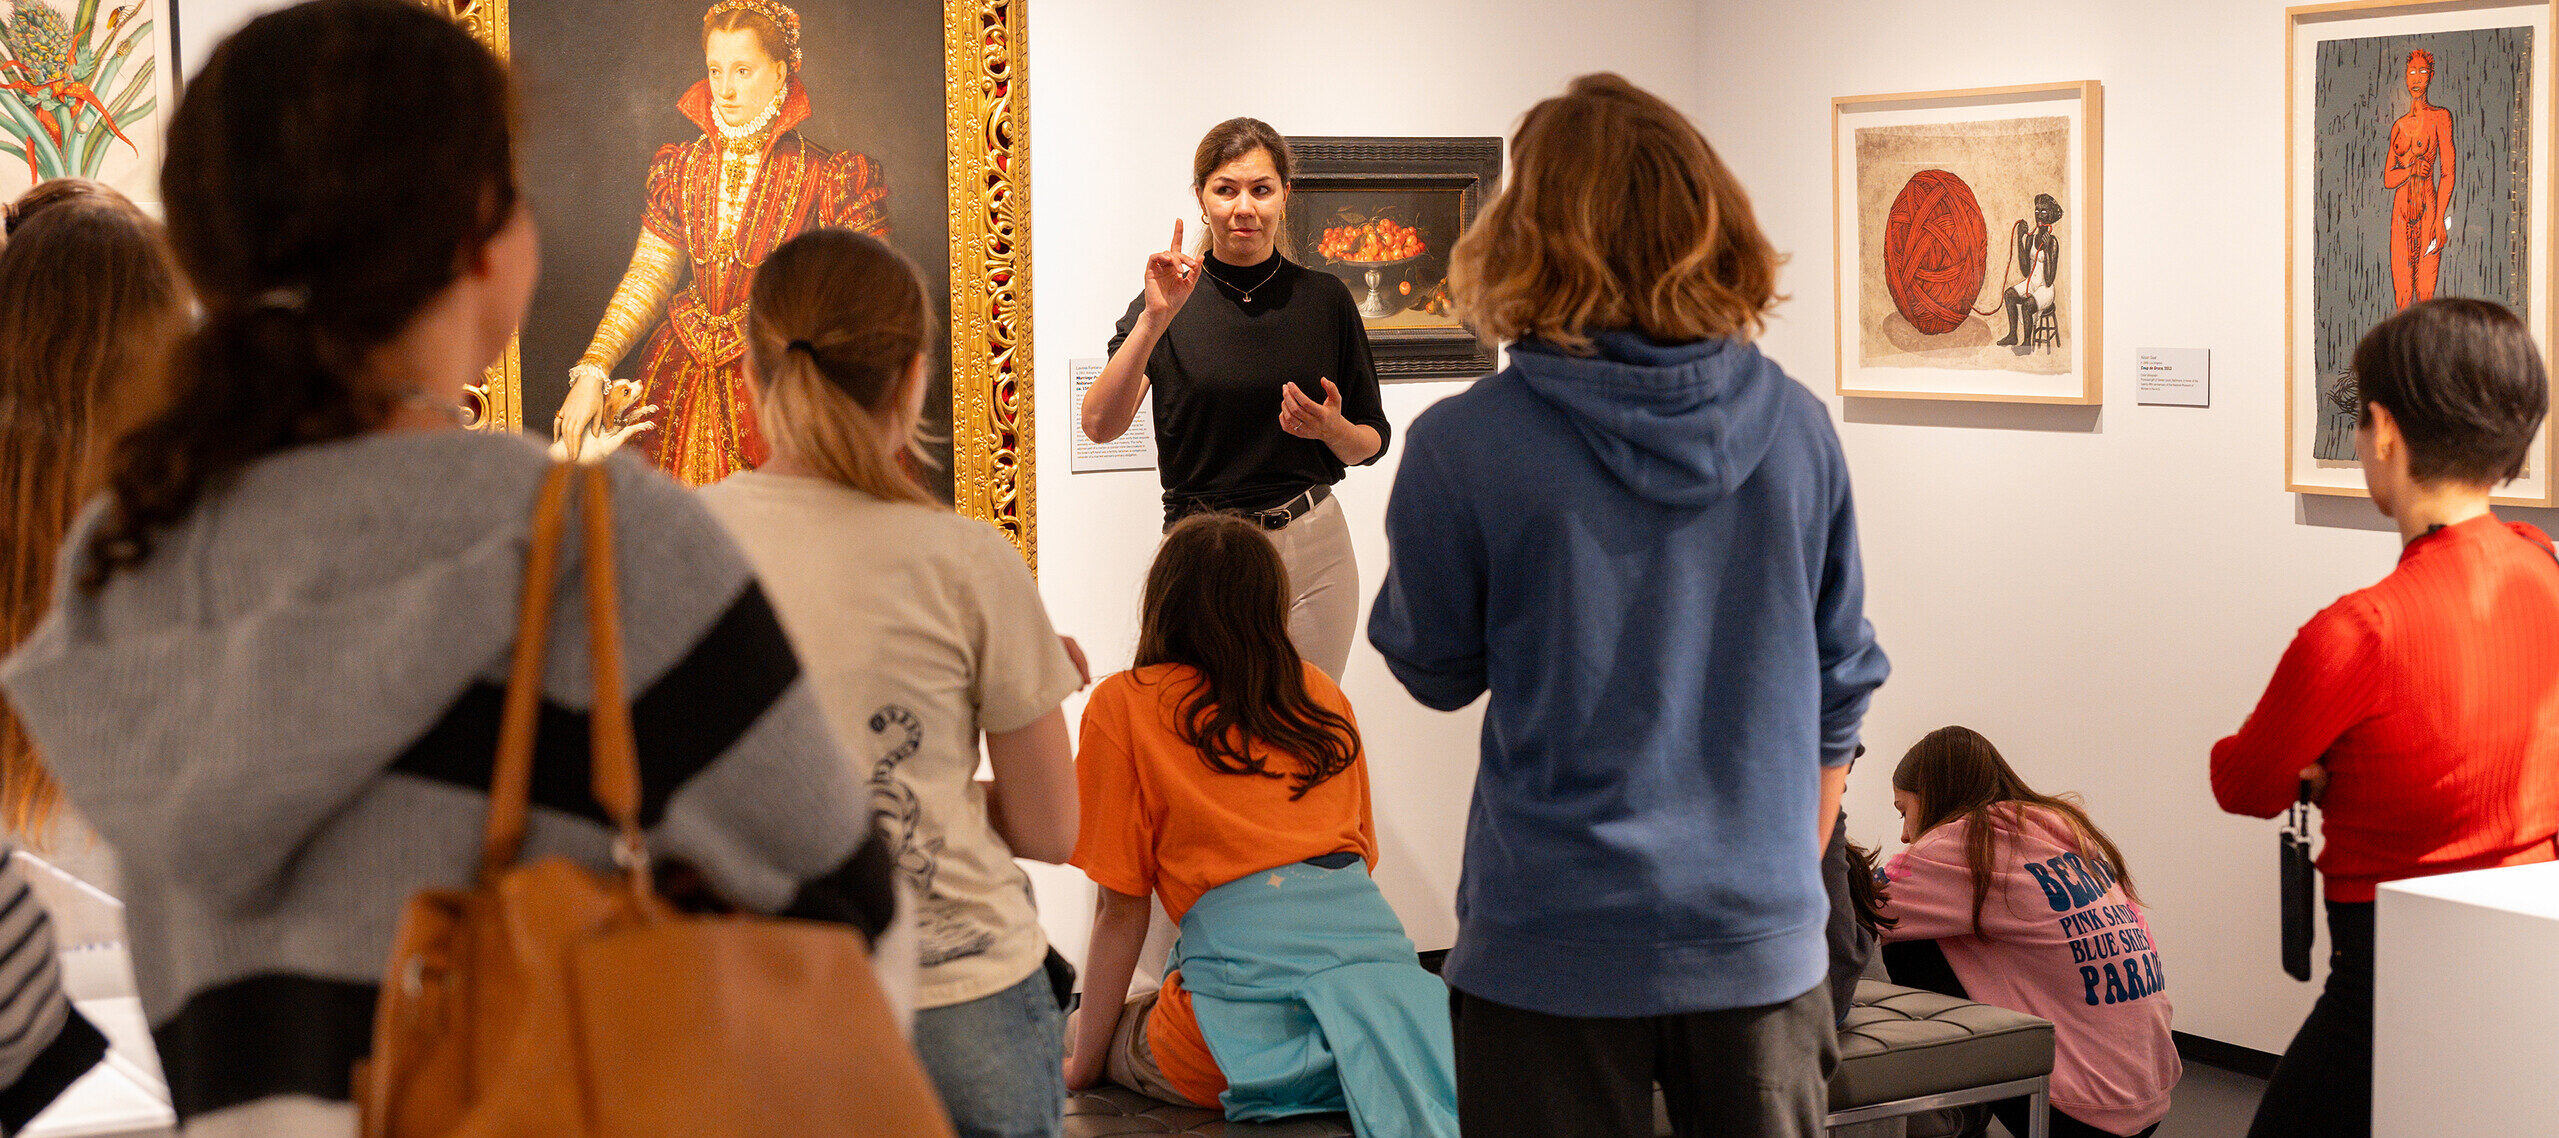 A woman with light colored skin, wearing a black top and white pants, talks to a group of people in a gallery room. She stands in front of a large, painted portrait of a woman in a high-collared red dress.